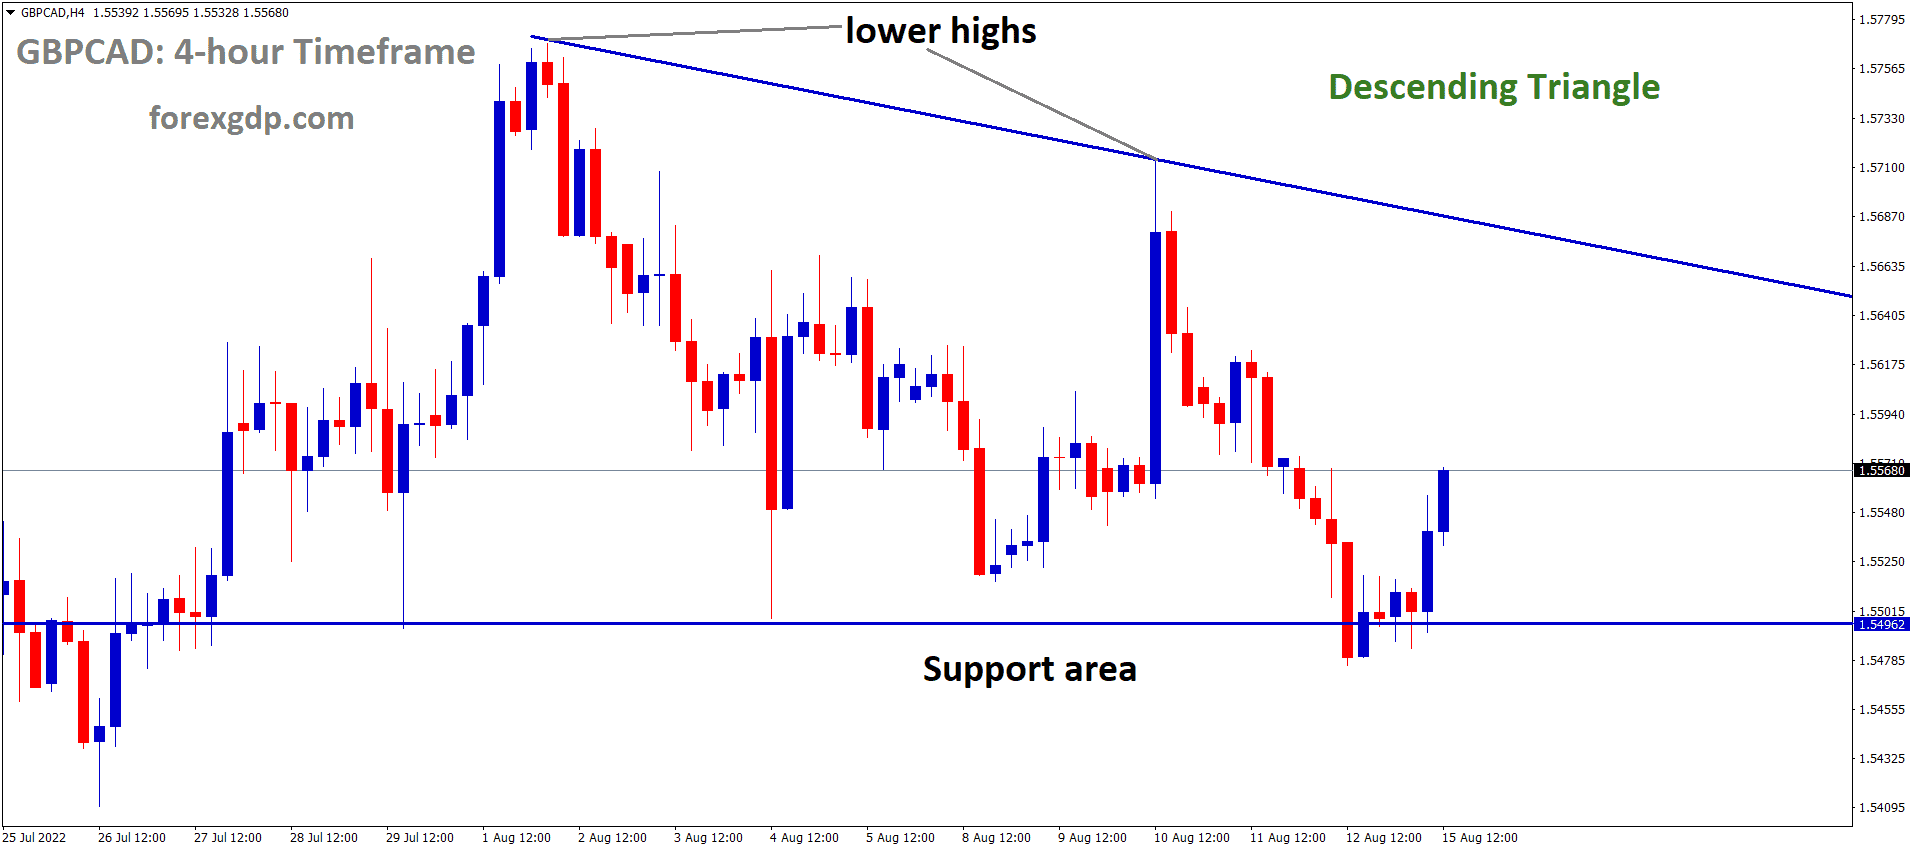 GBPCAD is moving in the Descending triangle pattern and the Market has rebounded from the horizontal support area of the pattern.